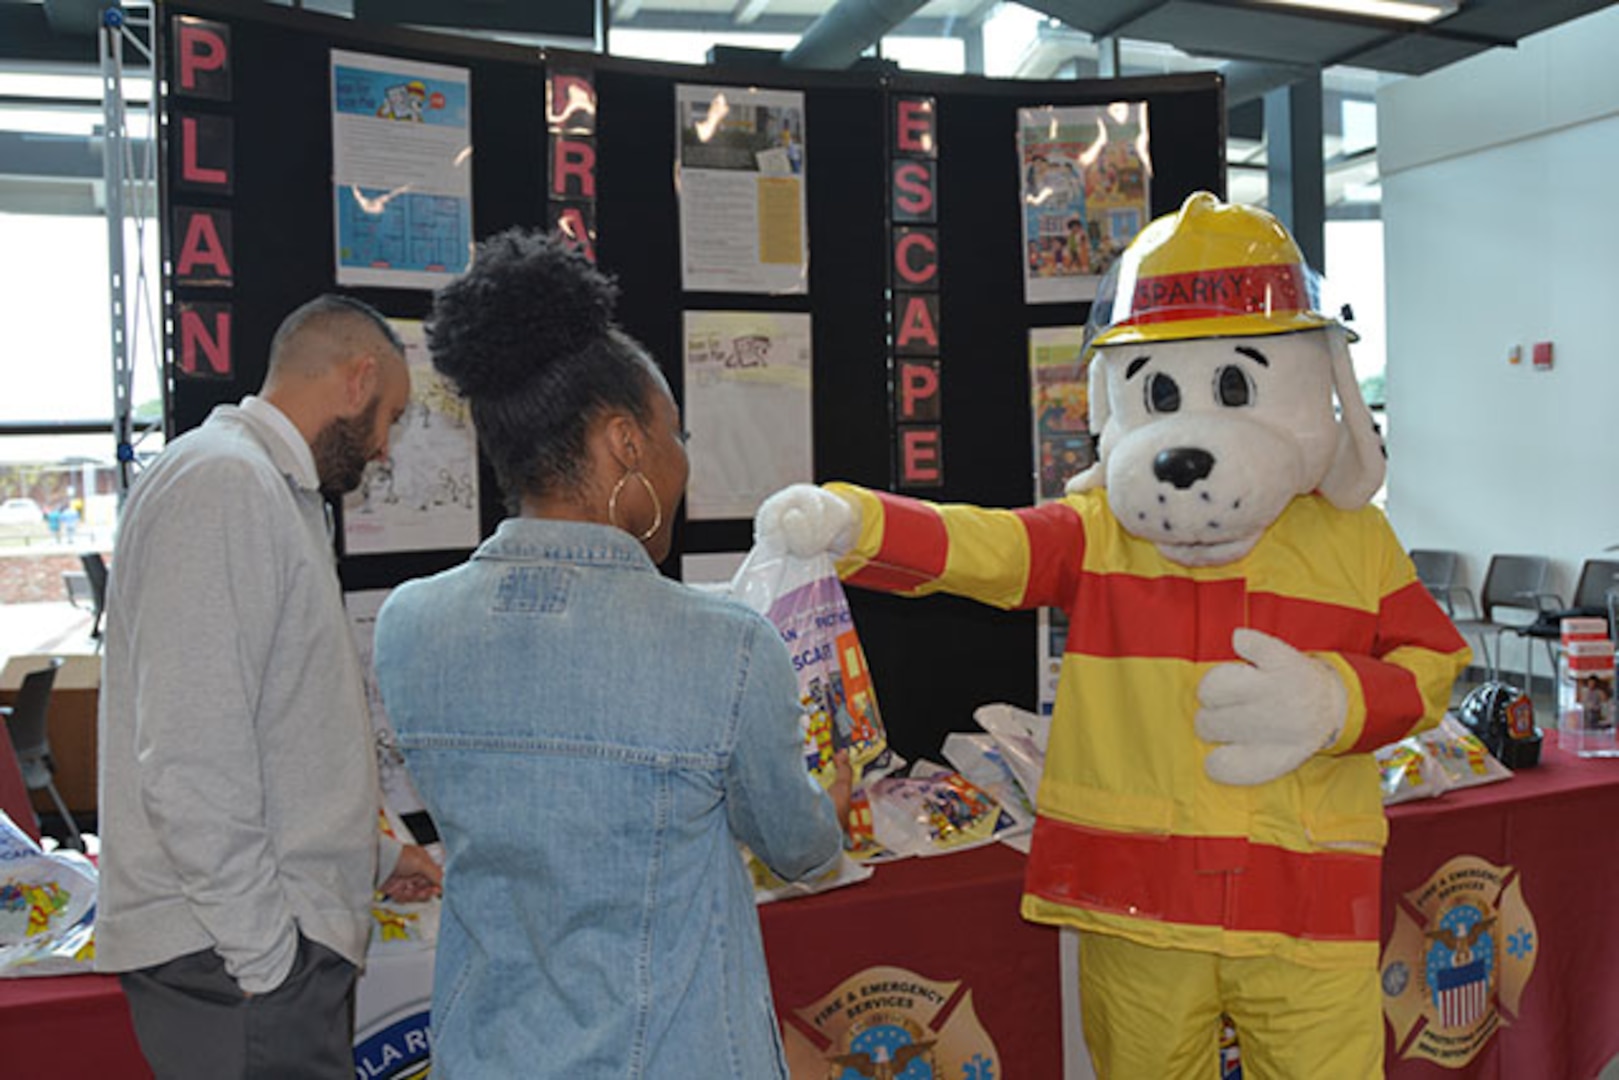 Sparky hands out fire prevention materials